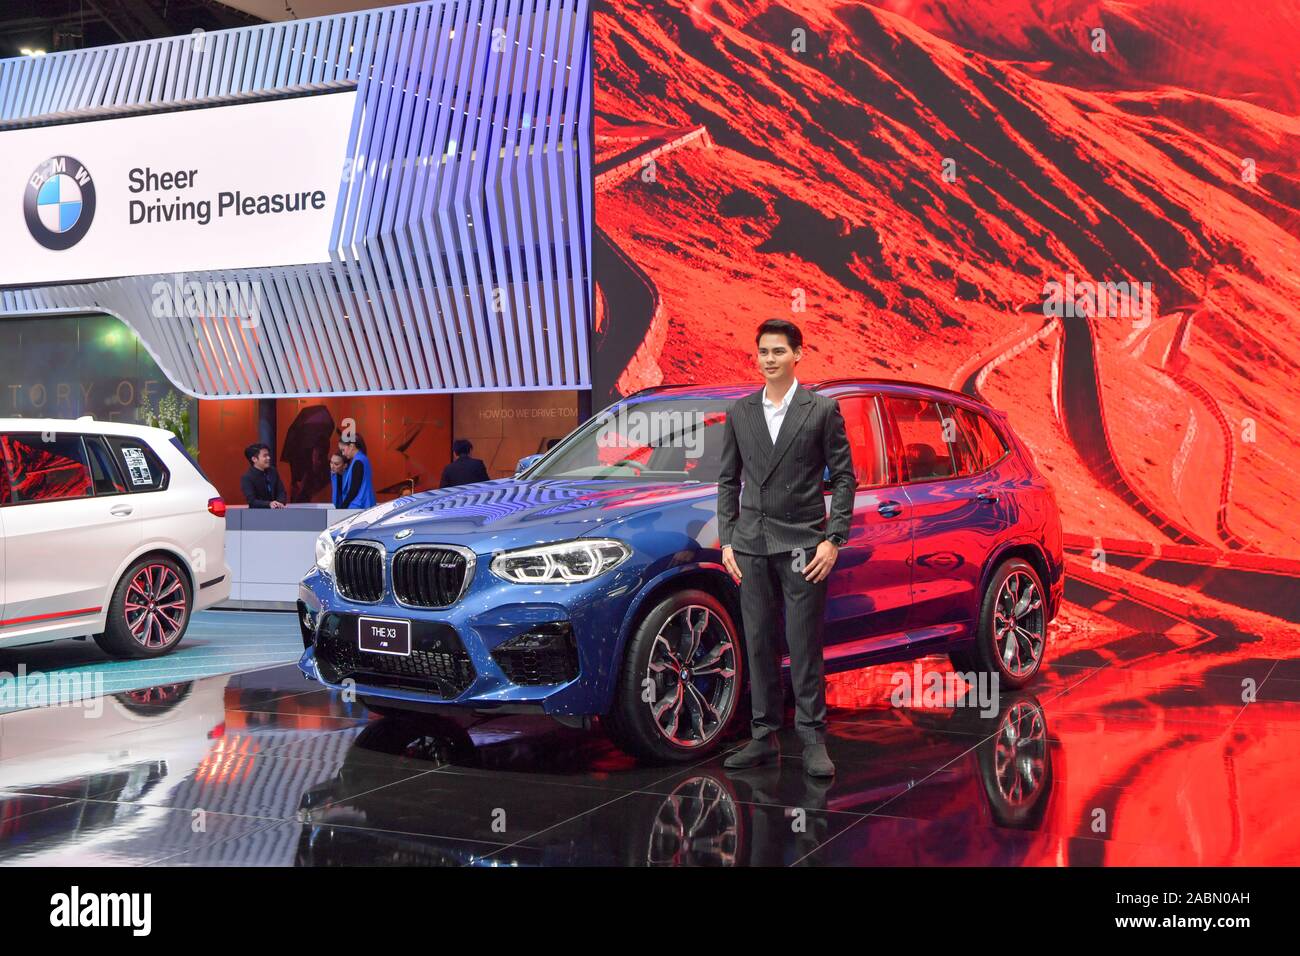 NONTHABURI - NOVEMBER 28: BMW THE X3 car on display at The 36th Thailand International Motor Expo 2019 on November 28, 2019 Nonthaburi, Thailand. Stock Photo